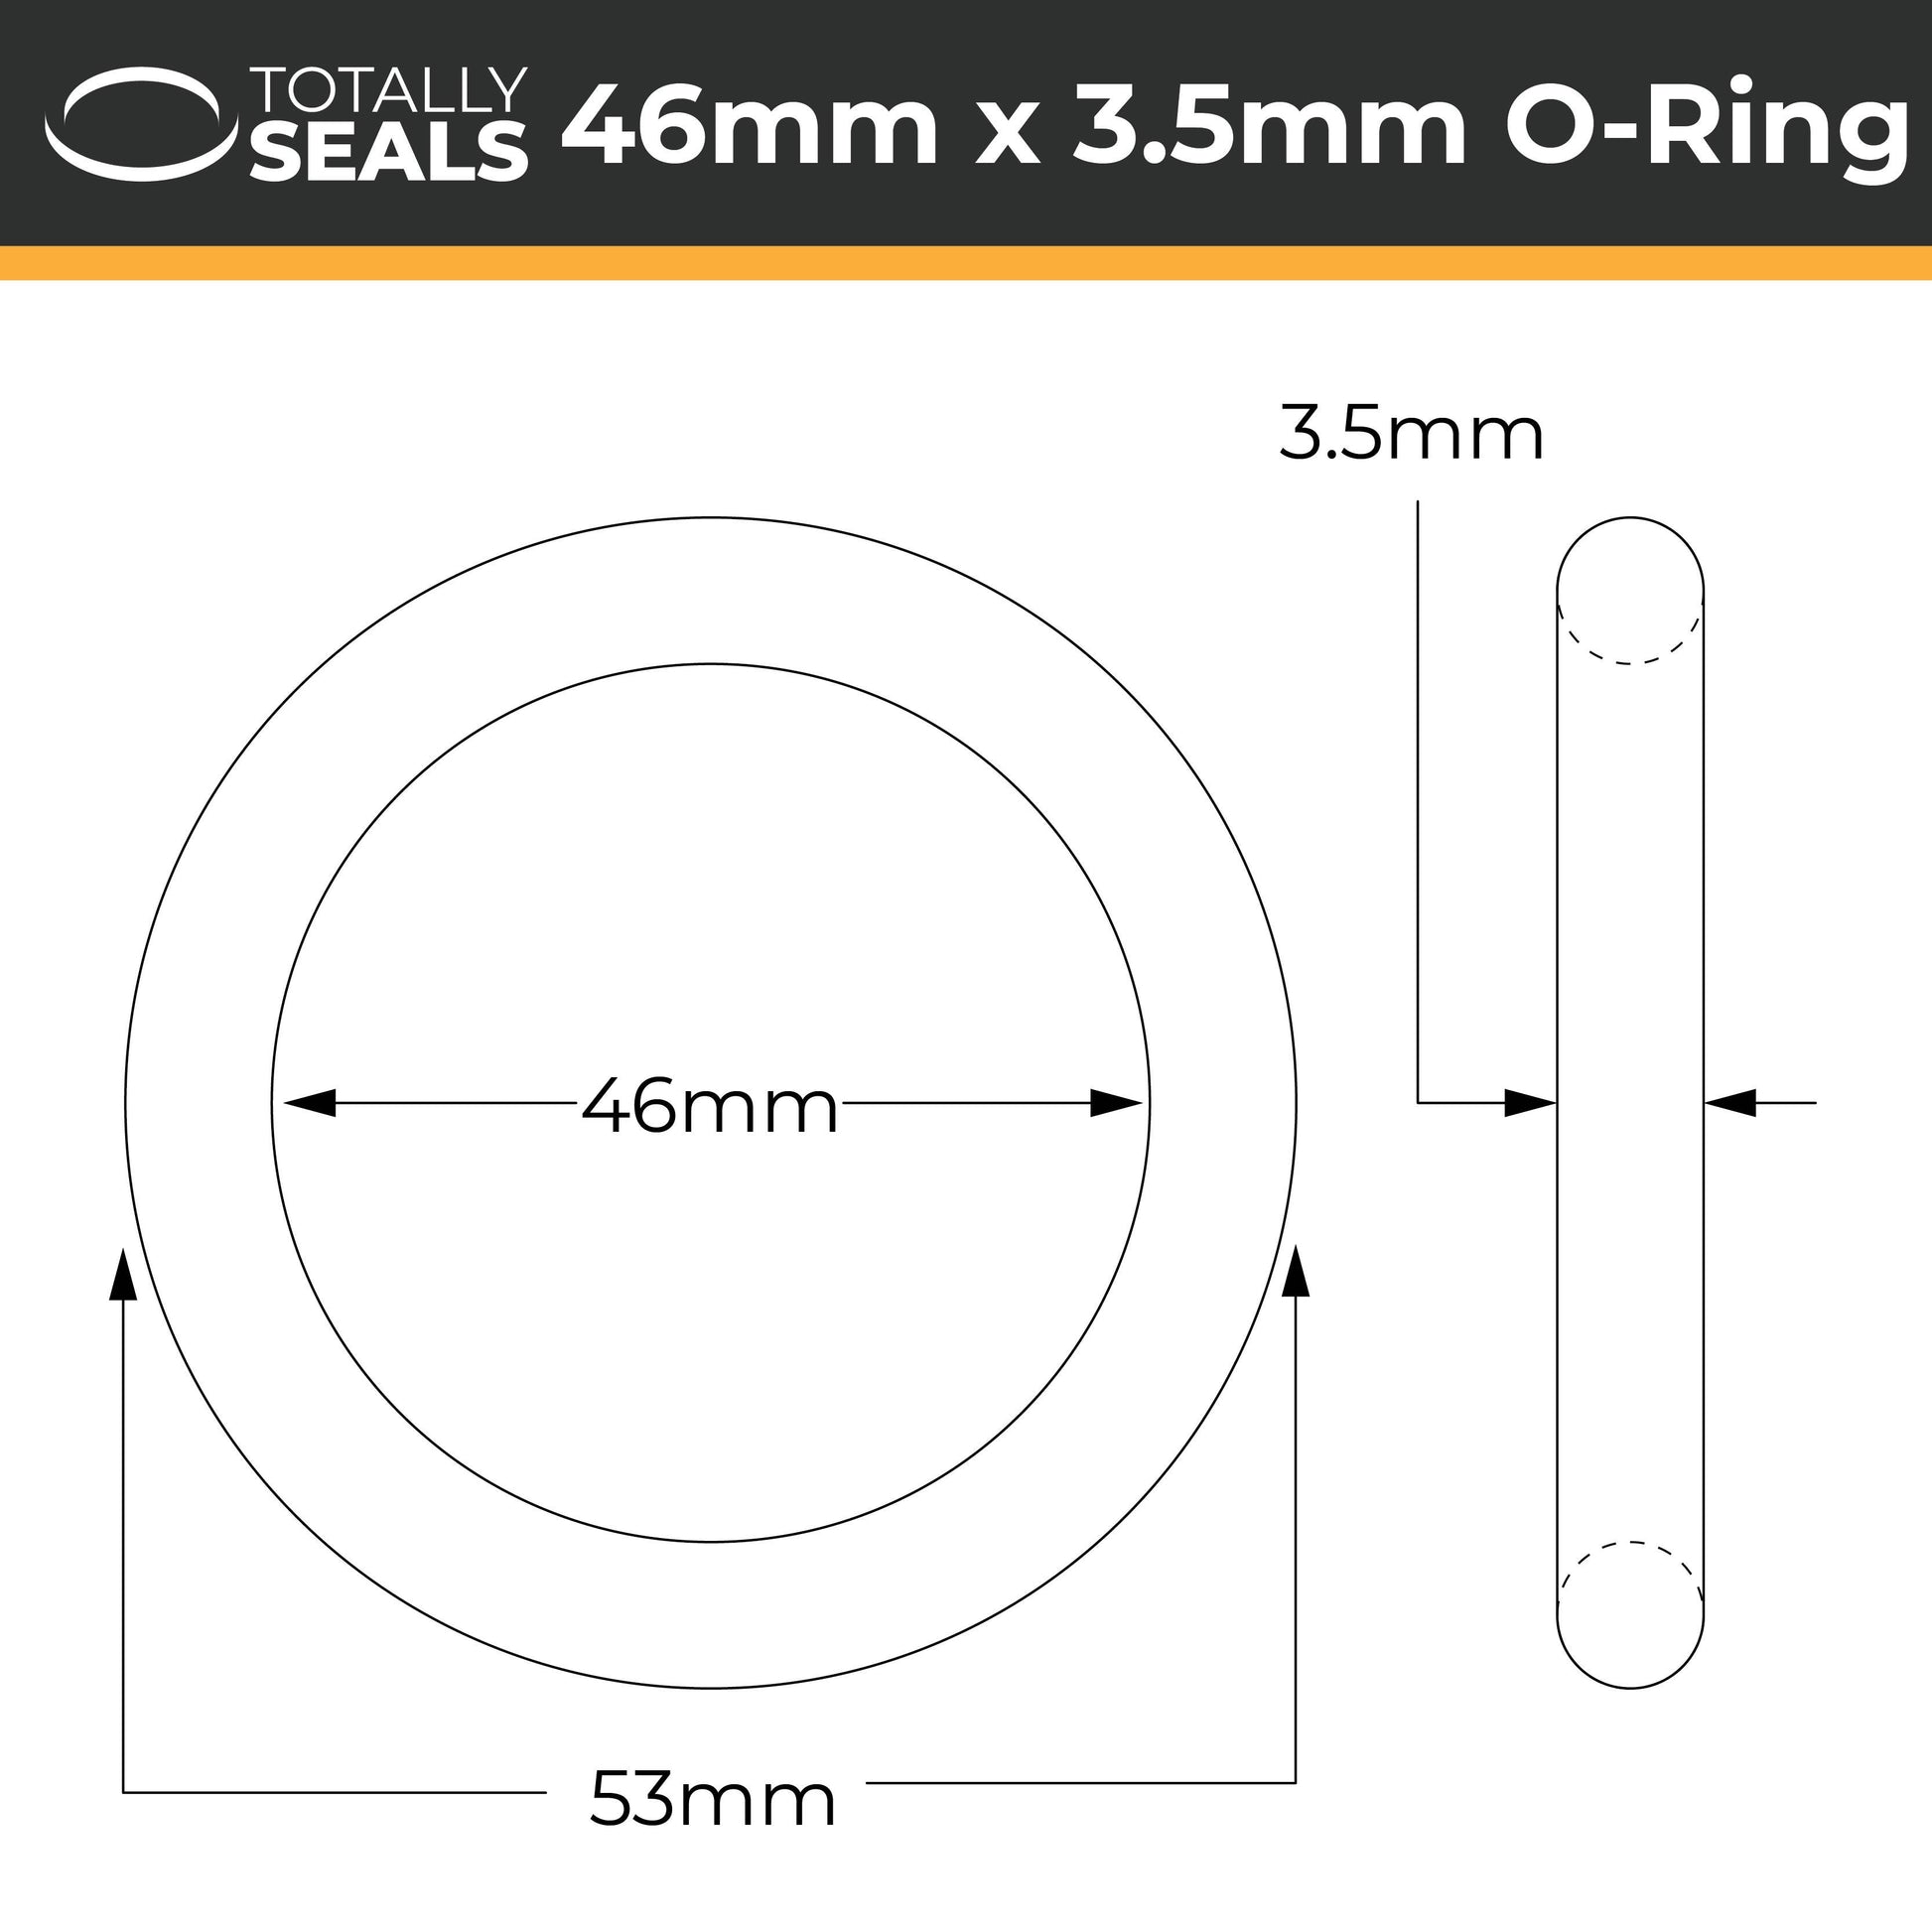 46mm x 3.5mm (53mm OD) Nitrile O-Rings - Totally Seals®